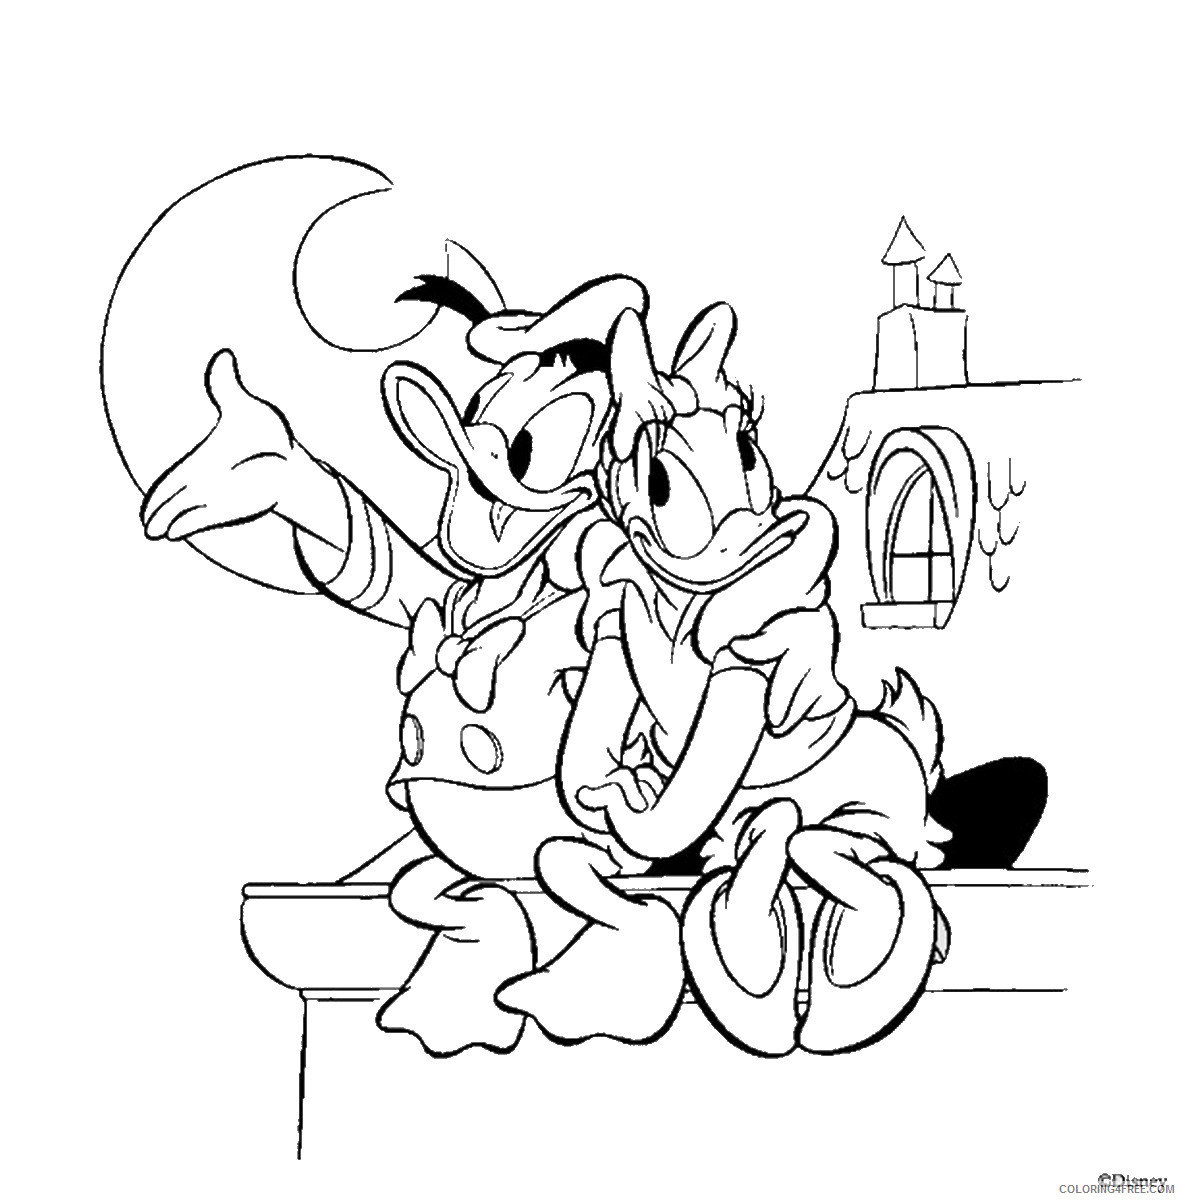 Donald and Daisy Duck Coloring Pages Cartoons donald_31 Printable 2020 2468 Coloring4free